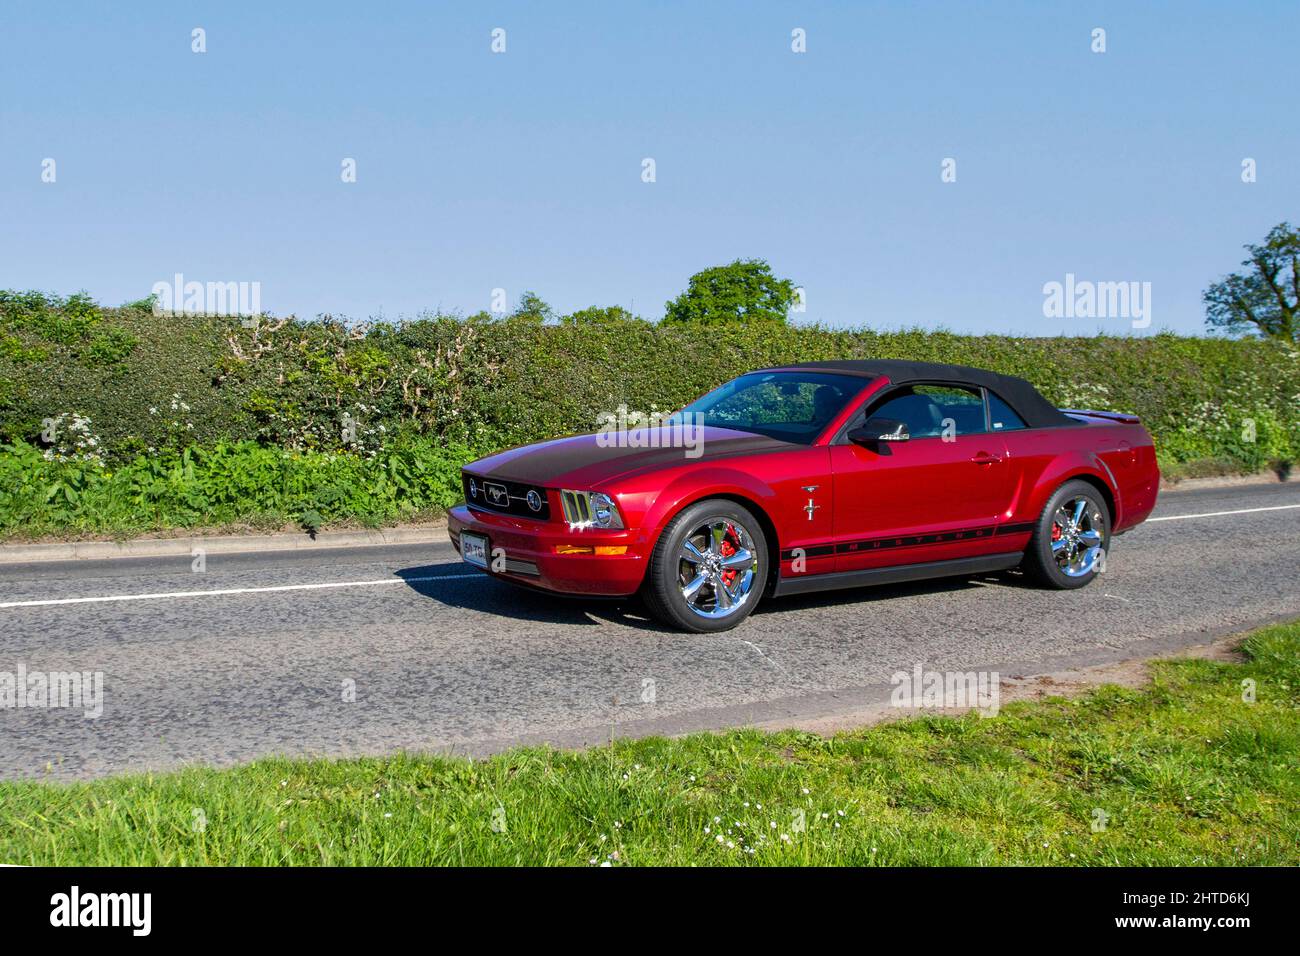 2007 red Ford Mustang 4000cc petrol pony car; Stock Photo